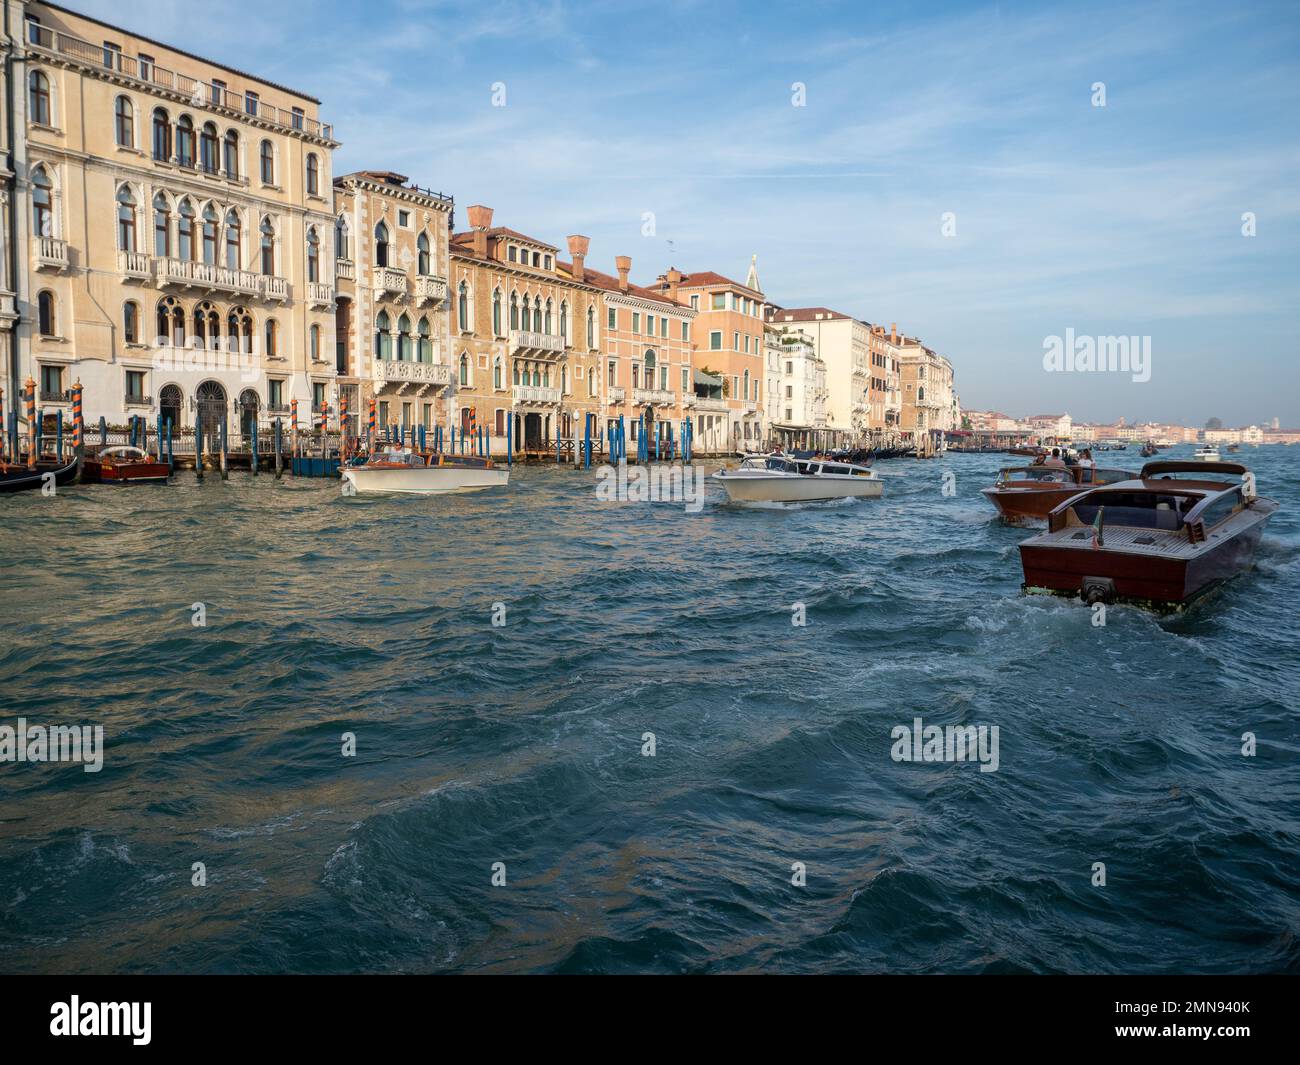 Boats sailing in Venice, Italy. Tourism and transportation concept. Stock Photo